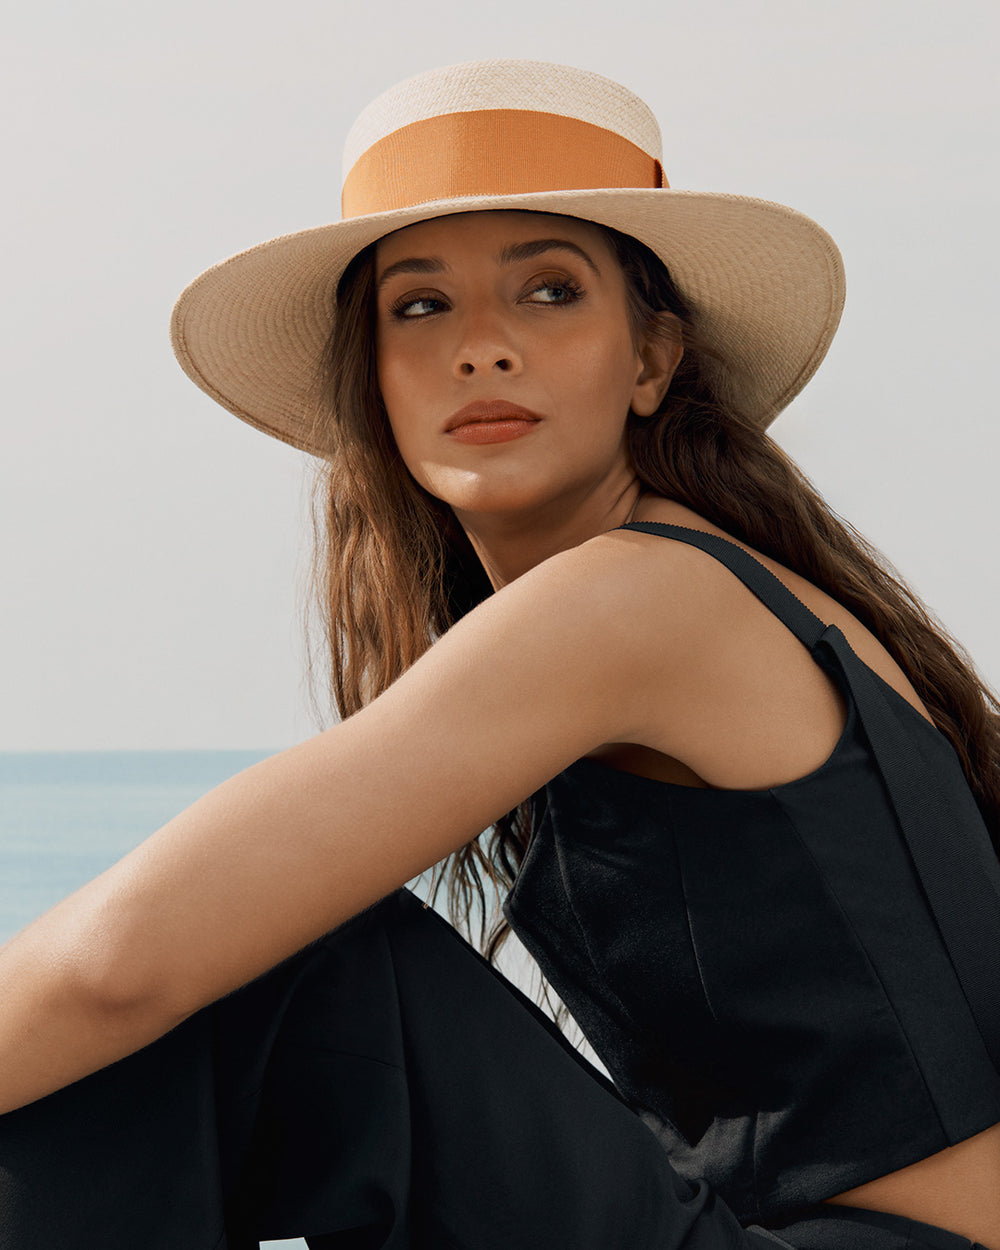 Woman in a hat sitting by the sea looking over her shoulder.